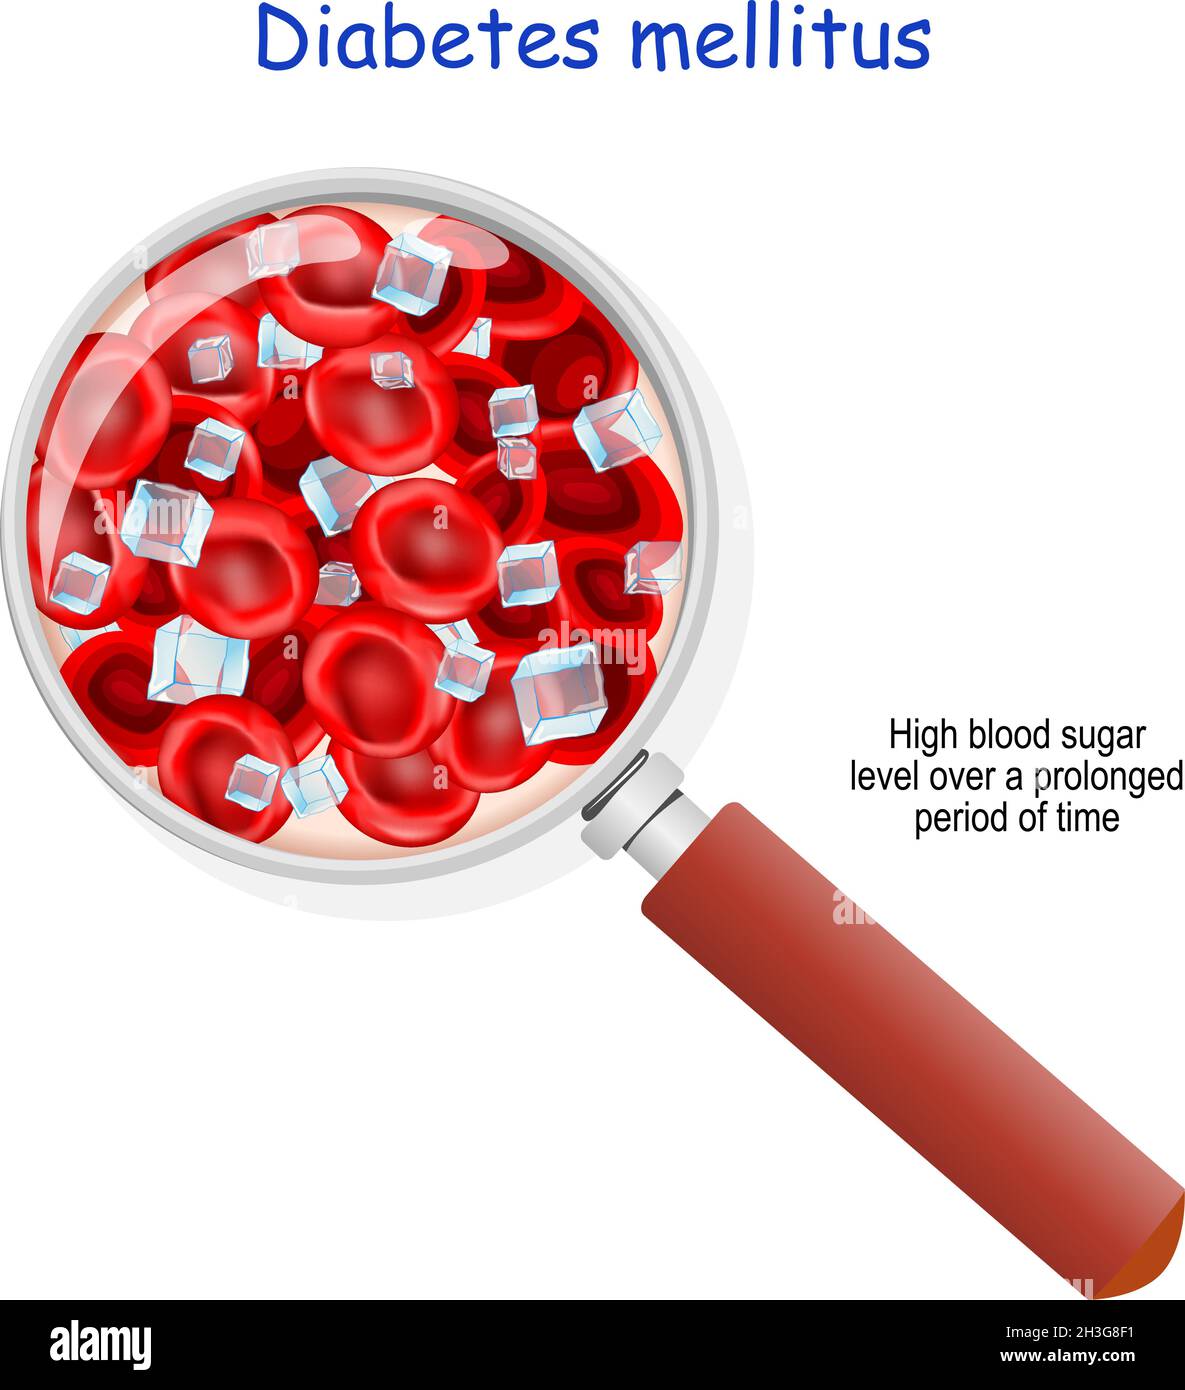 Diabetes mellitus. High blood sugar level over a prolonged period of time. magnifying glass. Close-up of blood flow with red blood cells and glucose Stock Vector